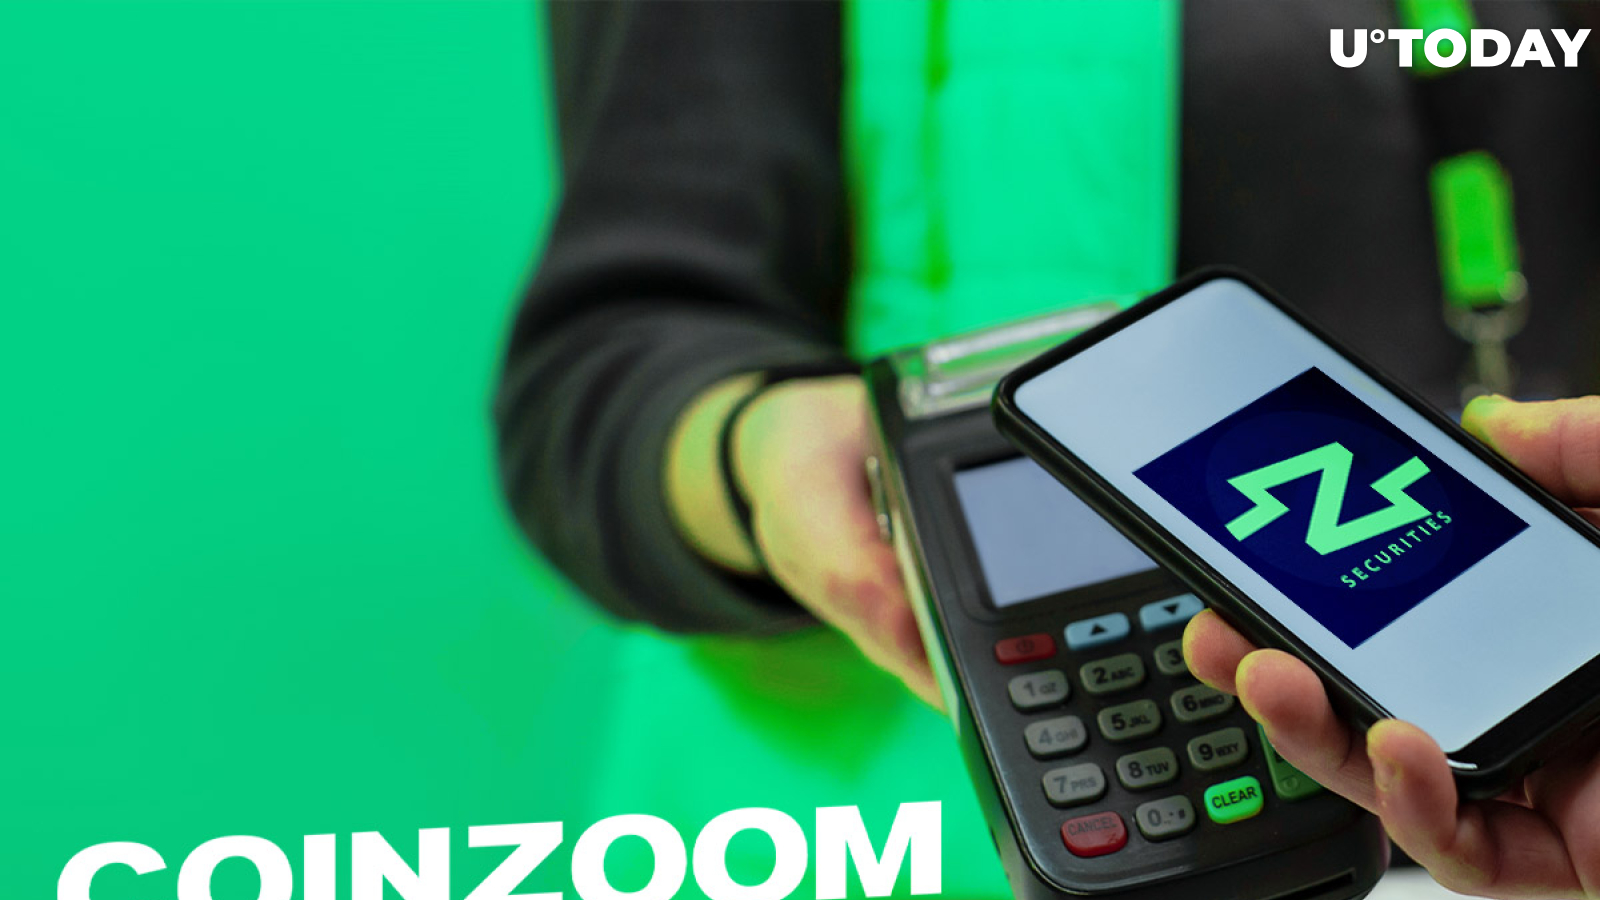 CoinZoom Integrates Apple, Google, and Samsung Pay Options For Visa Cardholders